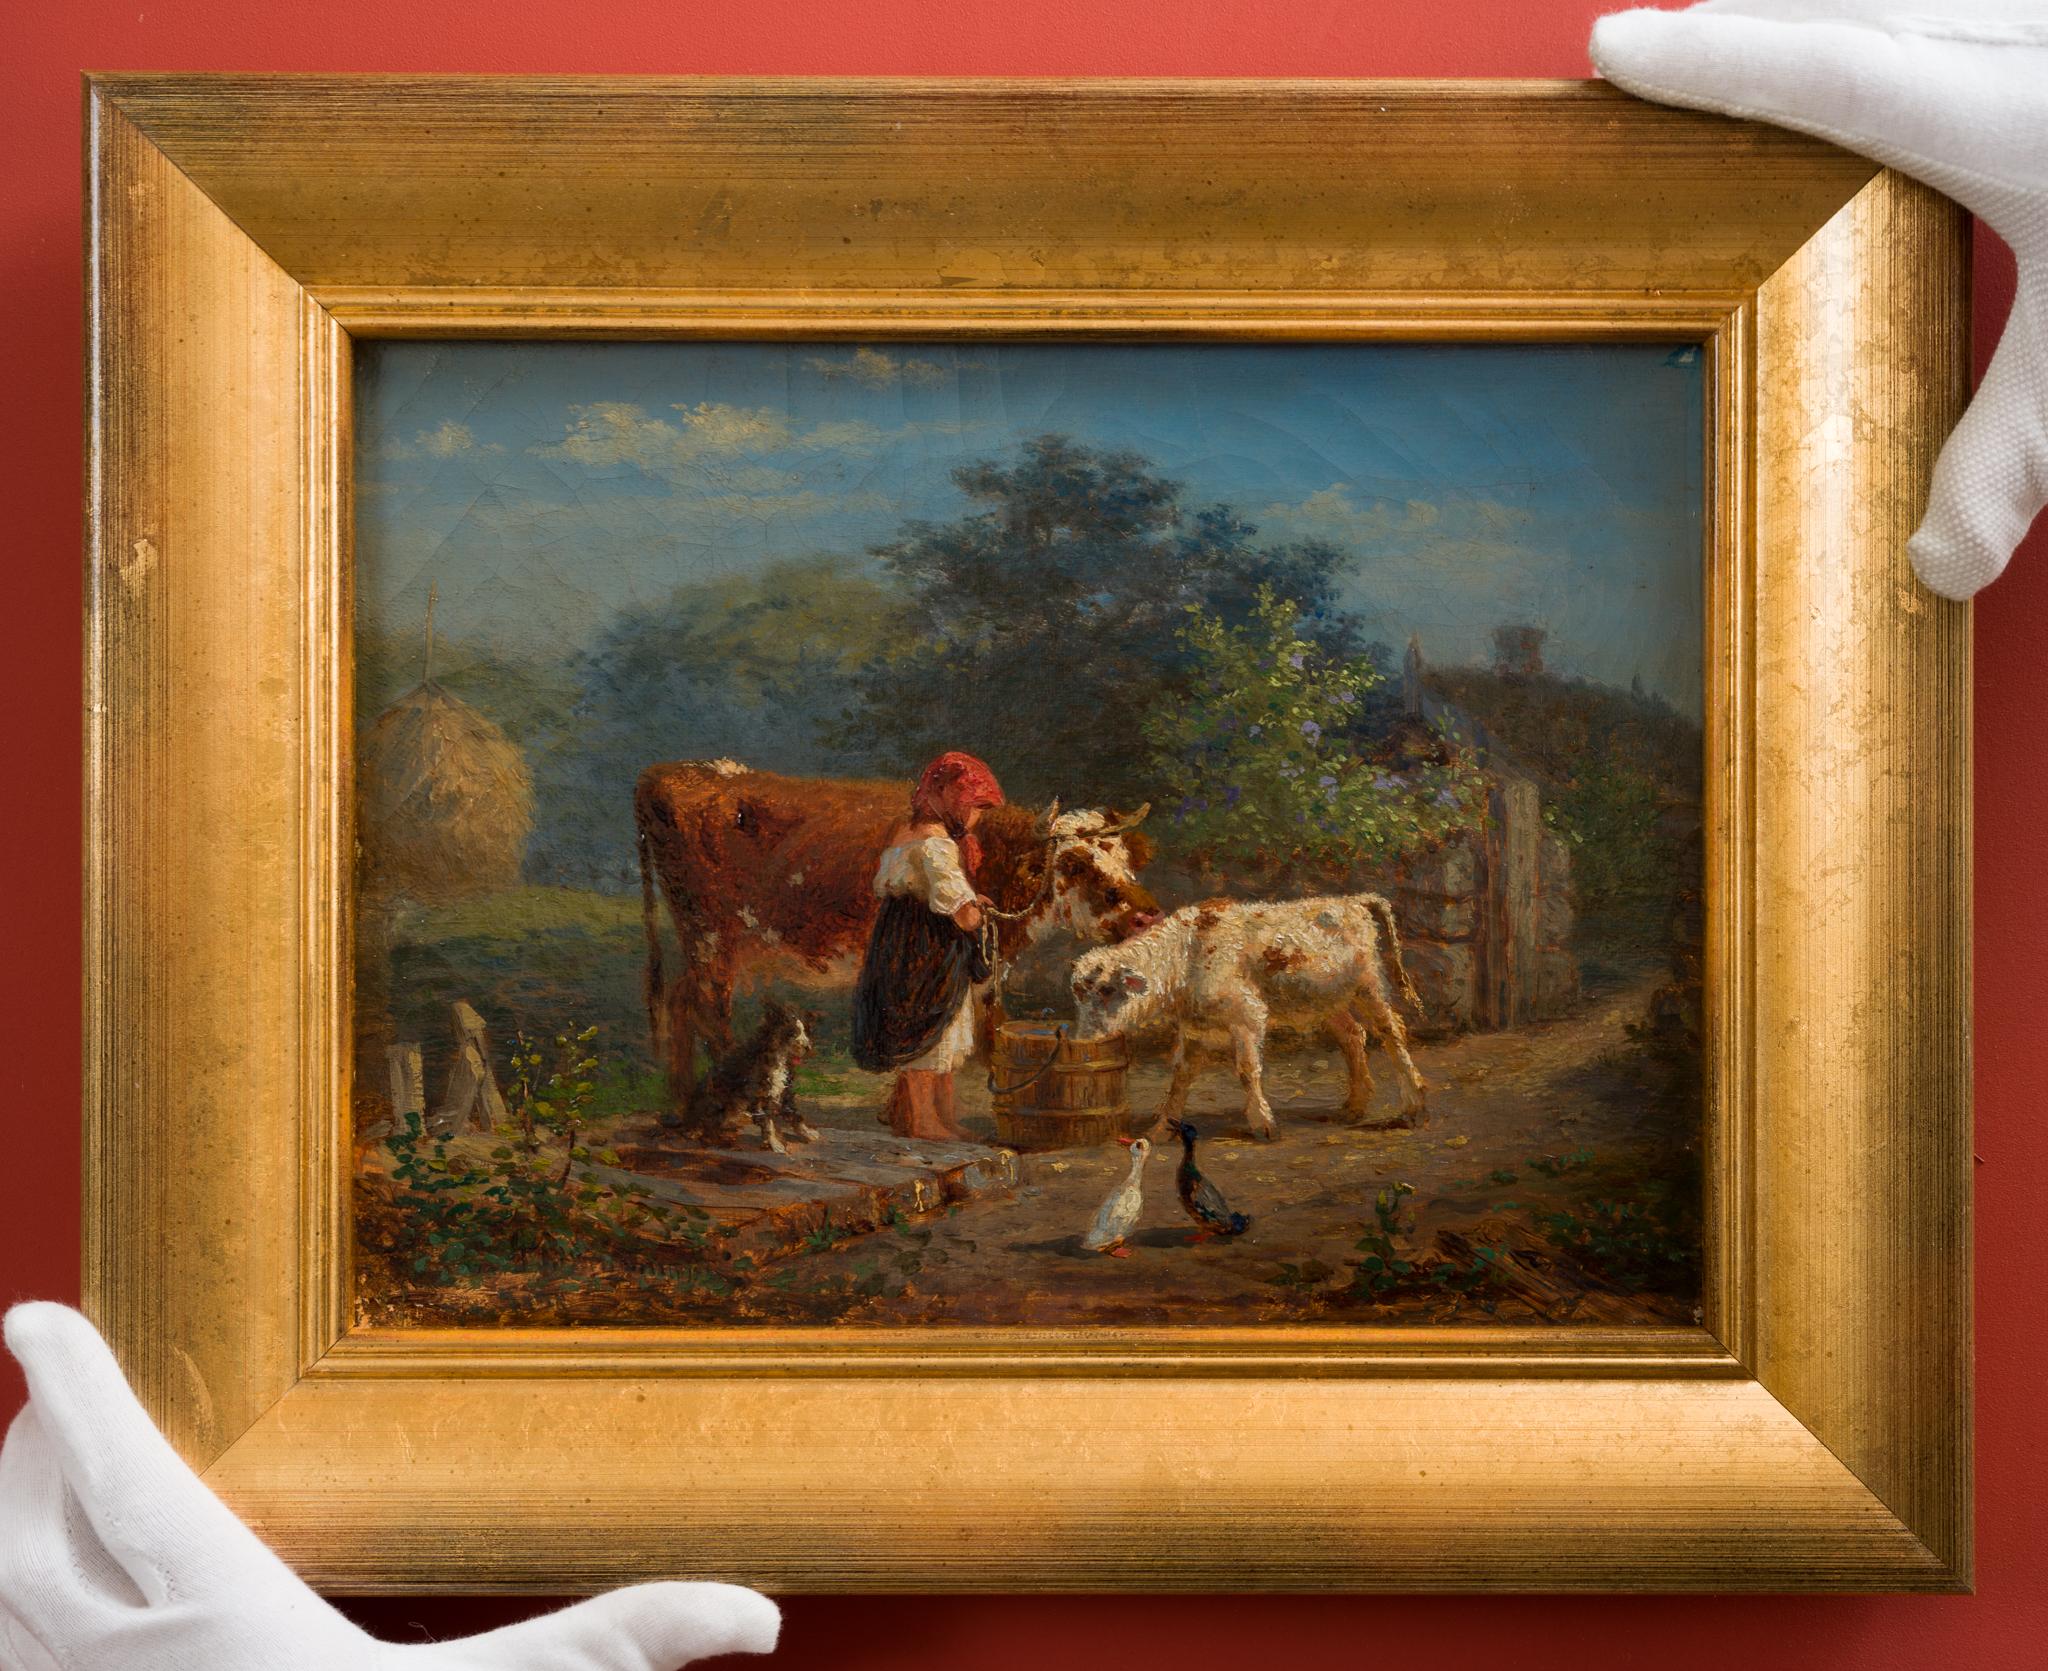 This painting by Gustaf Brandelius, a 19th-century Swedish artist, evokes the pastoral tranquility and rural life of the era. Brandelius was not only a painter but also served in the military, rising to the rank of captain before his